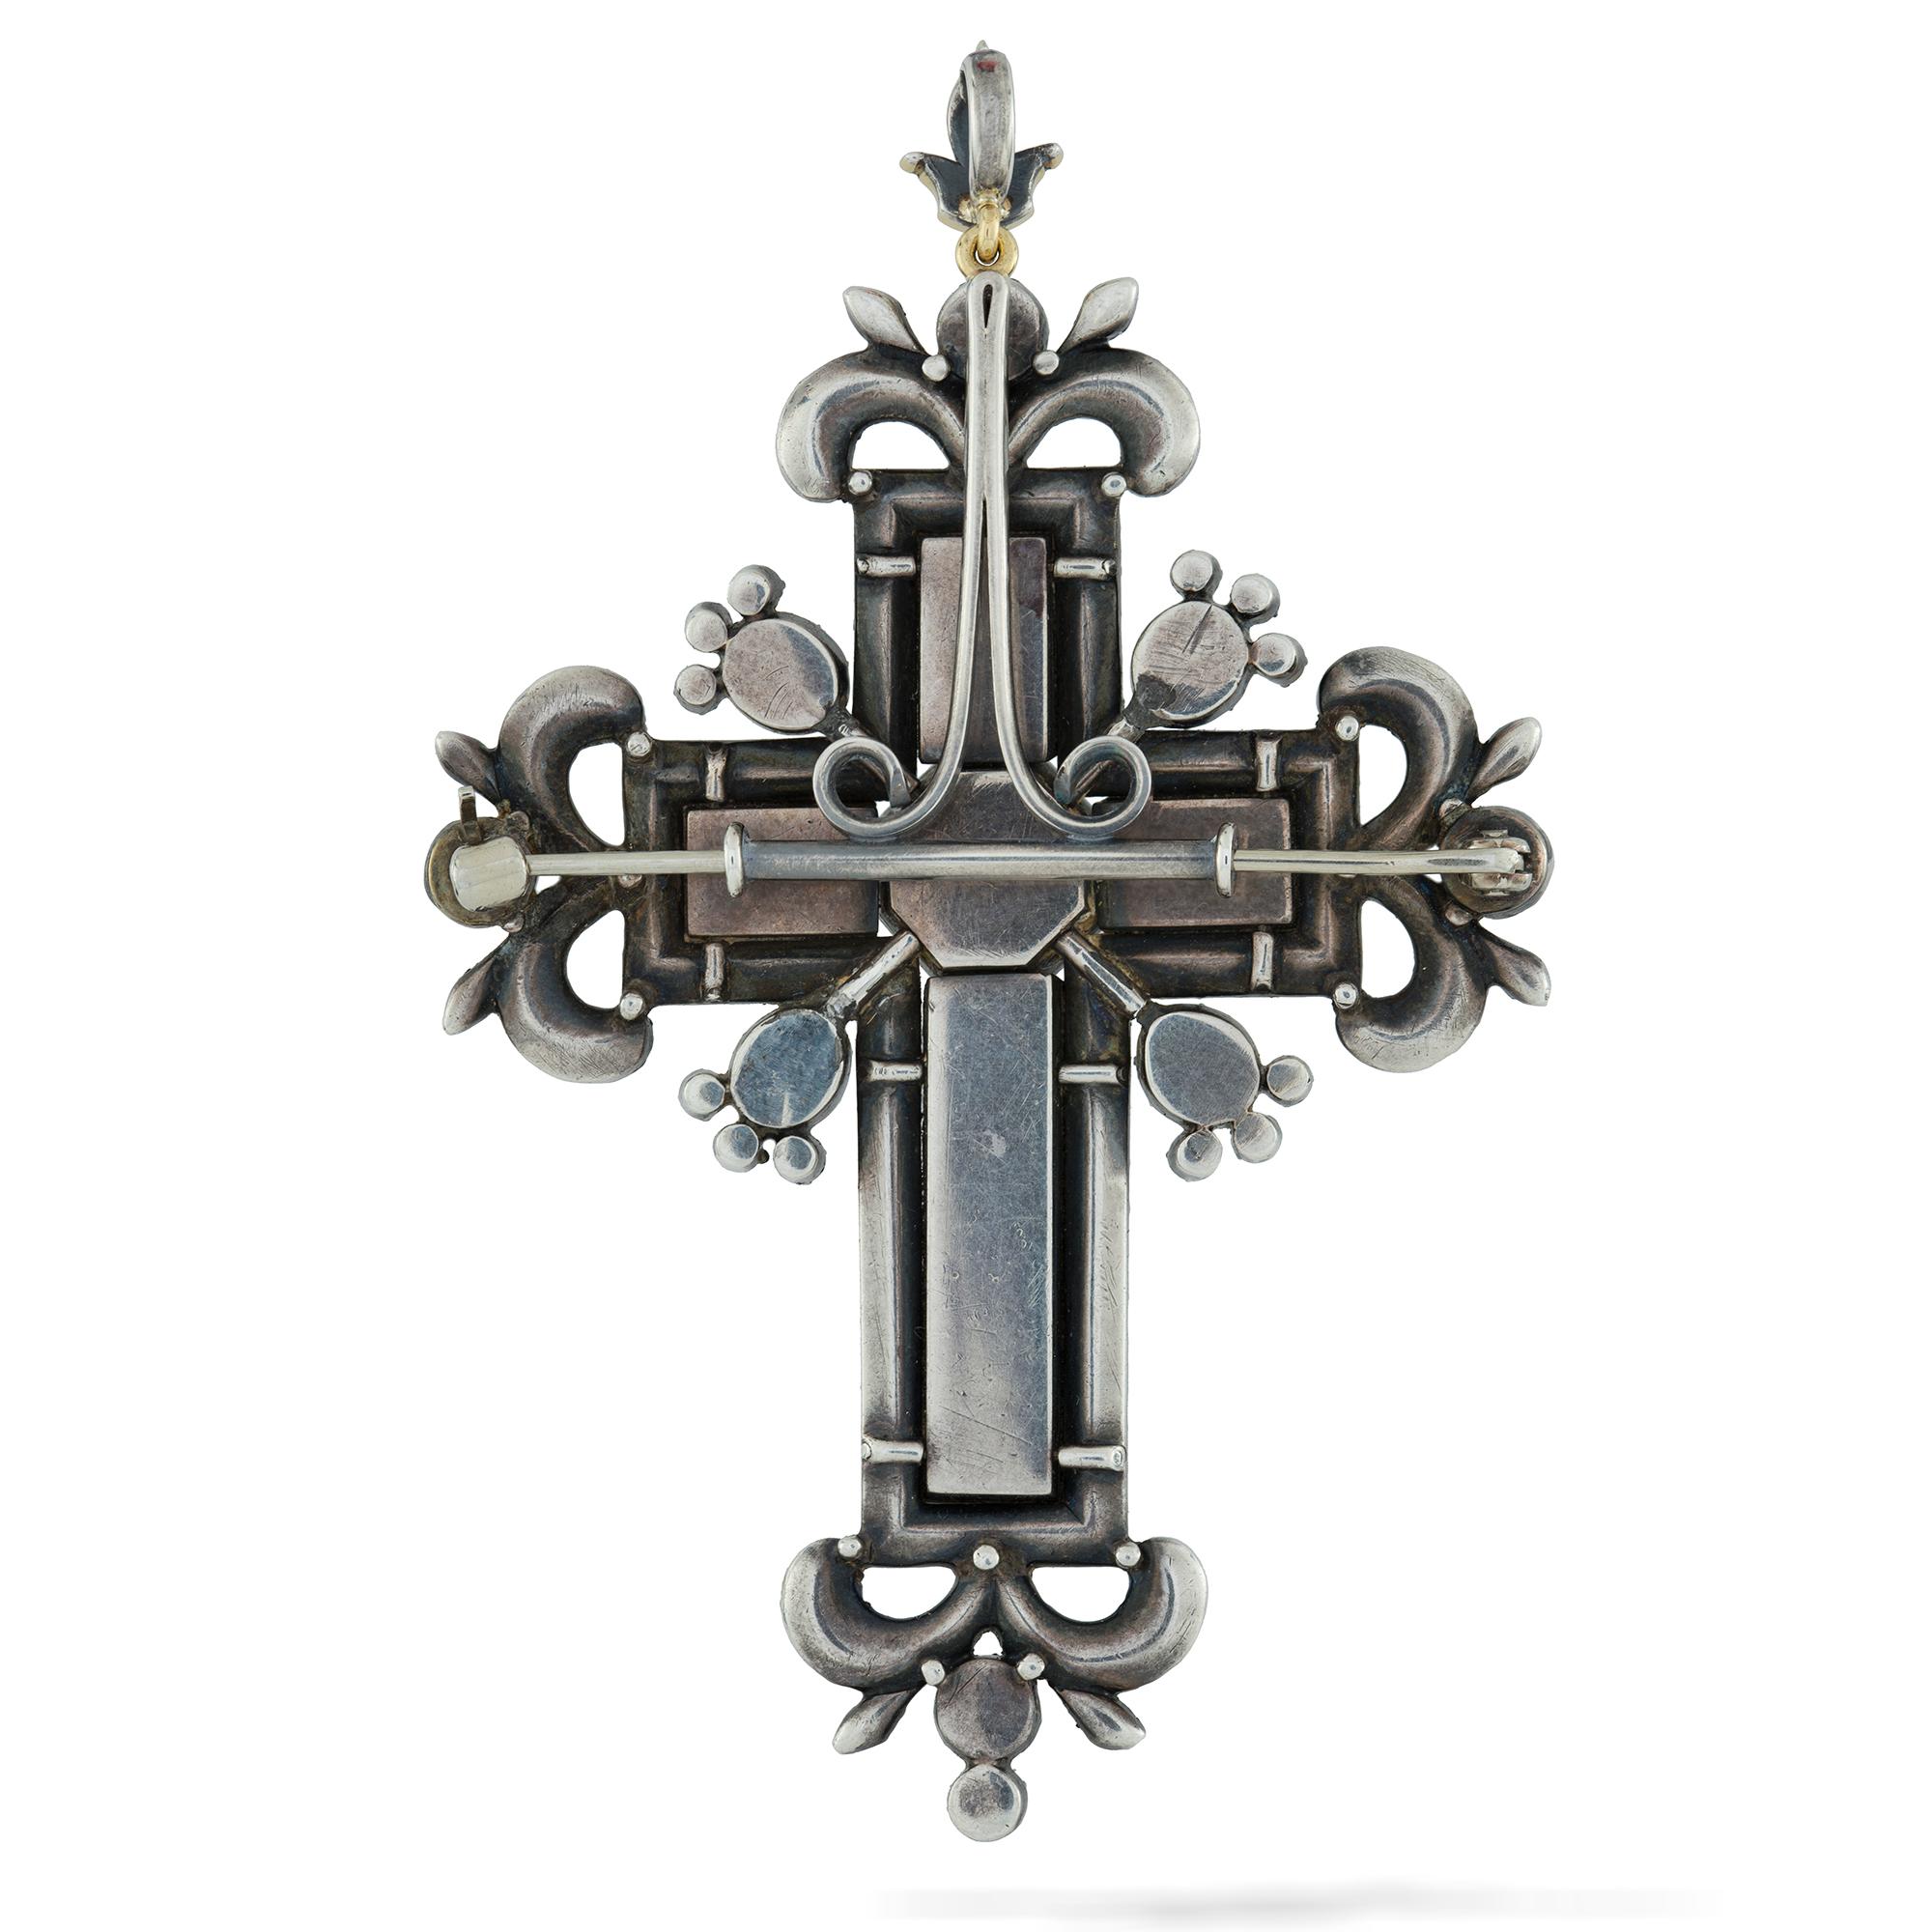 A Georgian beryl and diamond cross brooch, in the form of a stylised Latin cross set with ten faceted colourless beryls coloured with pink foil backs, surrounded by rose-cut diamonds, all set in silver with a silver brooch fitting and a detachable